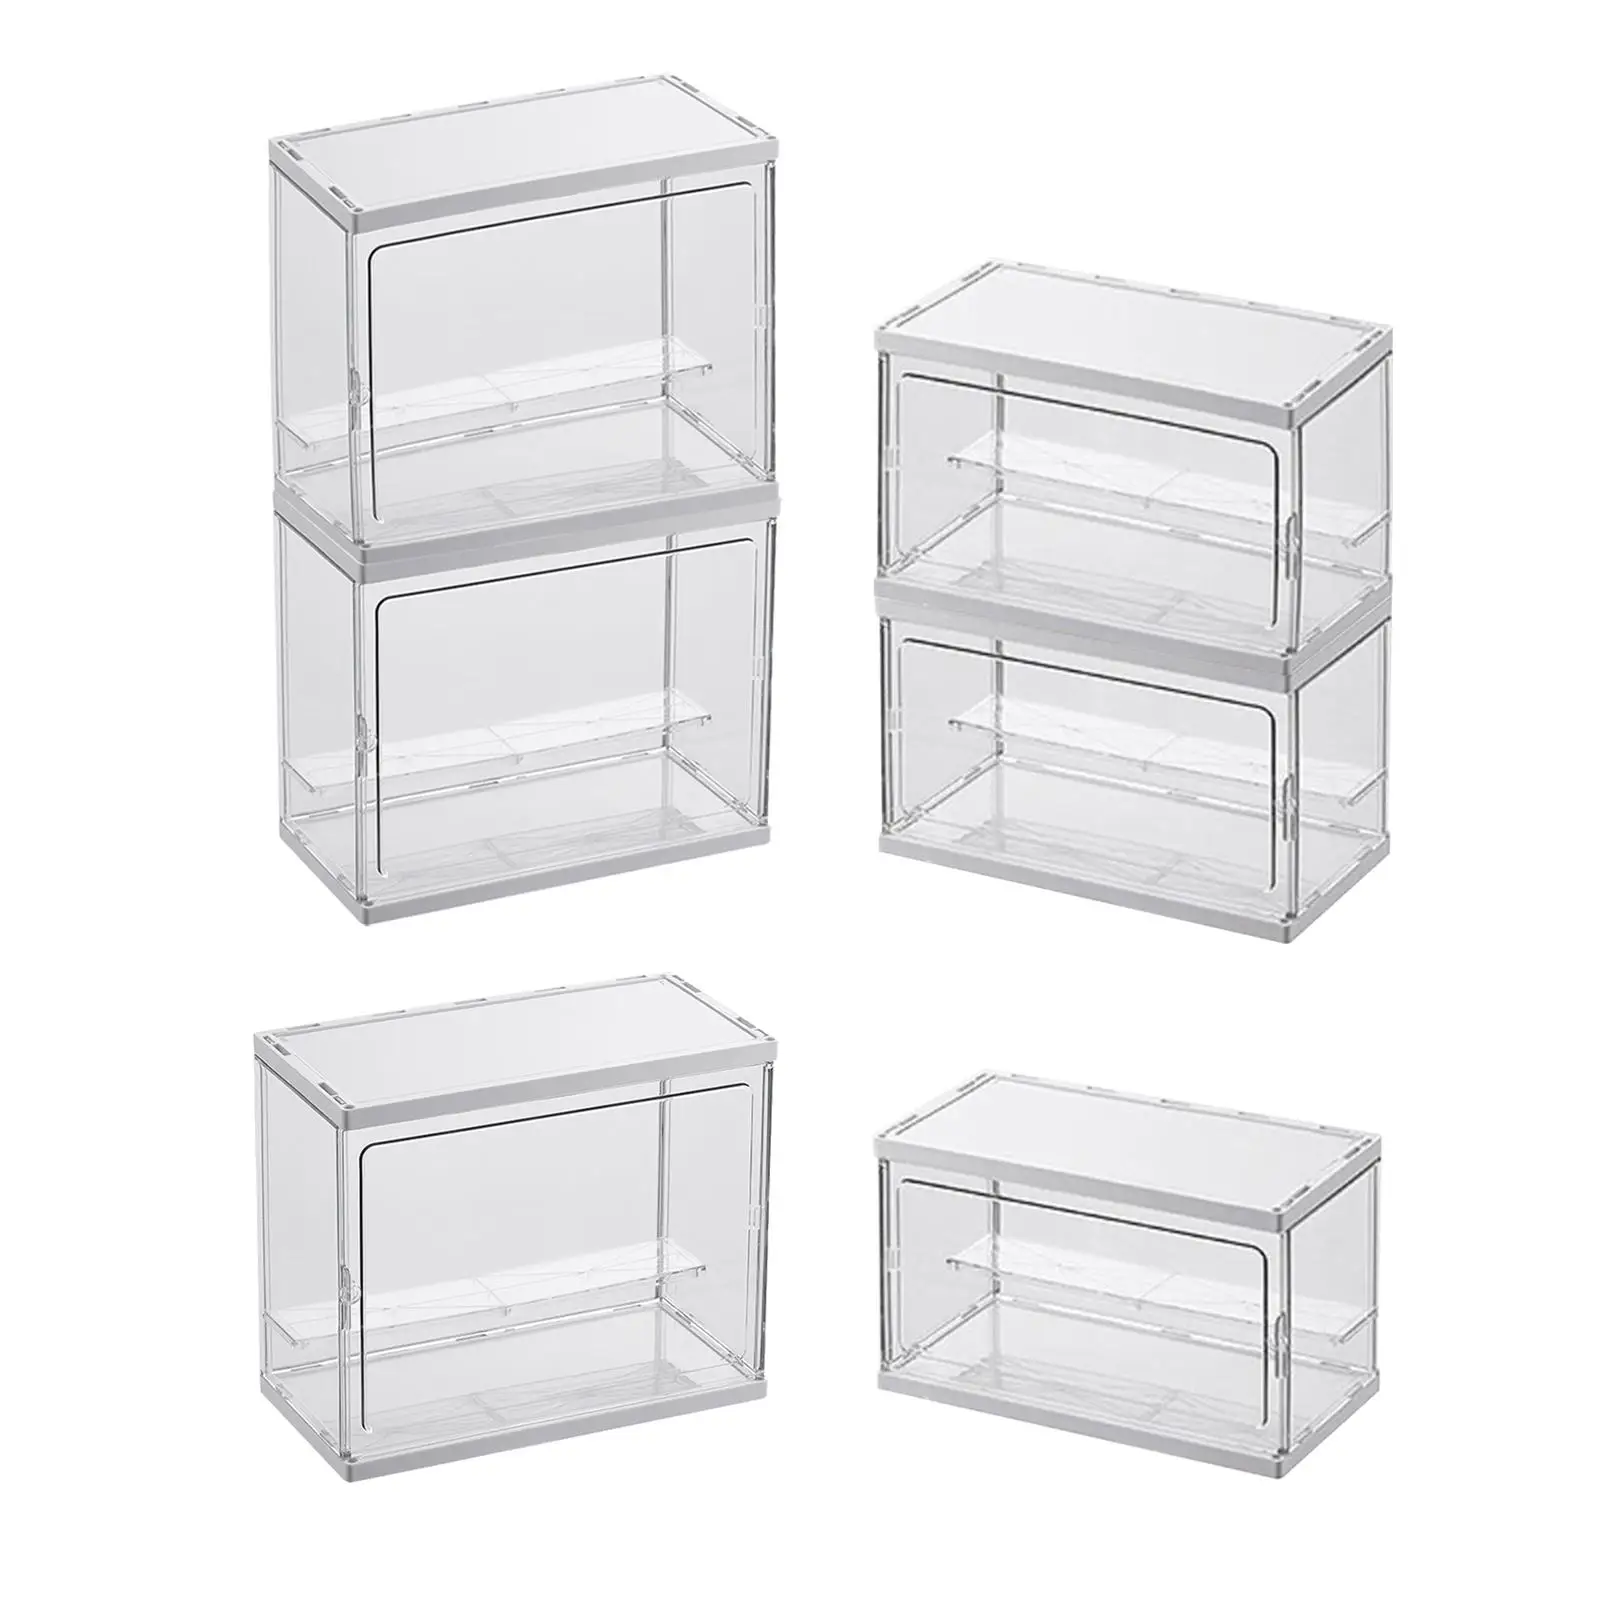 Display Case Showcase Stand Dustproof for Action Figures Toy Collectibles Model Car